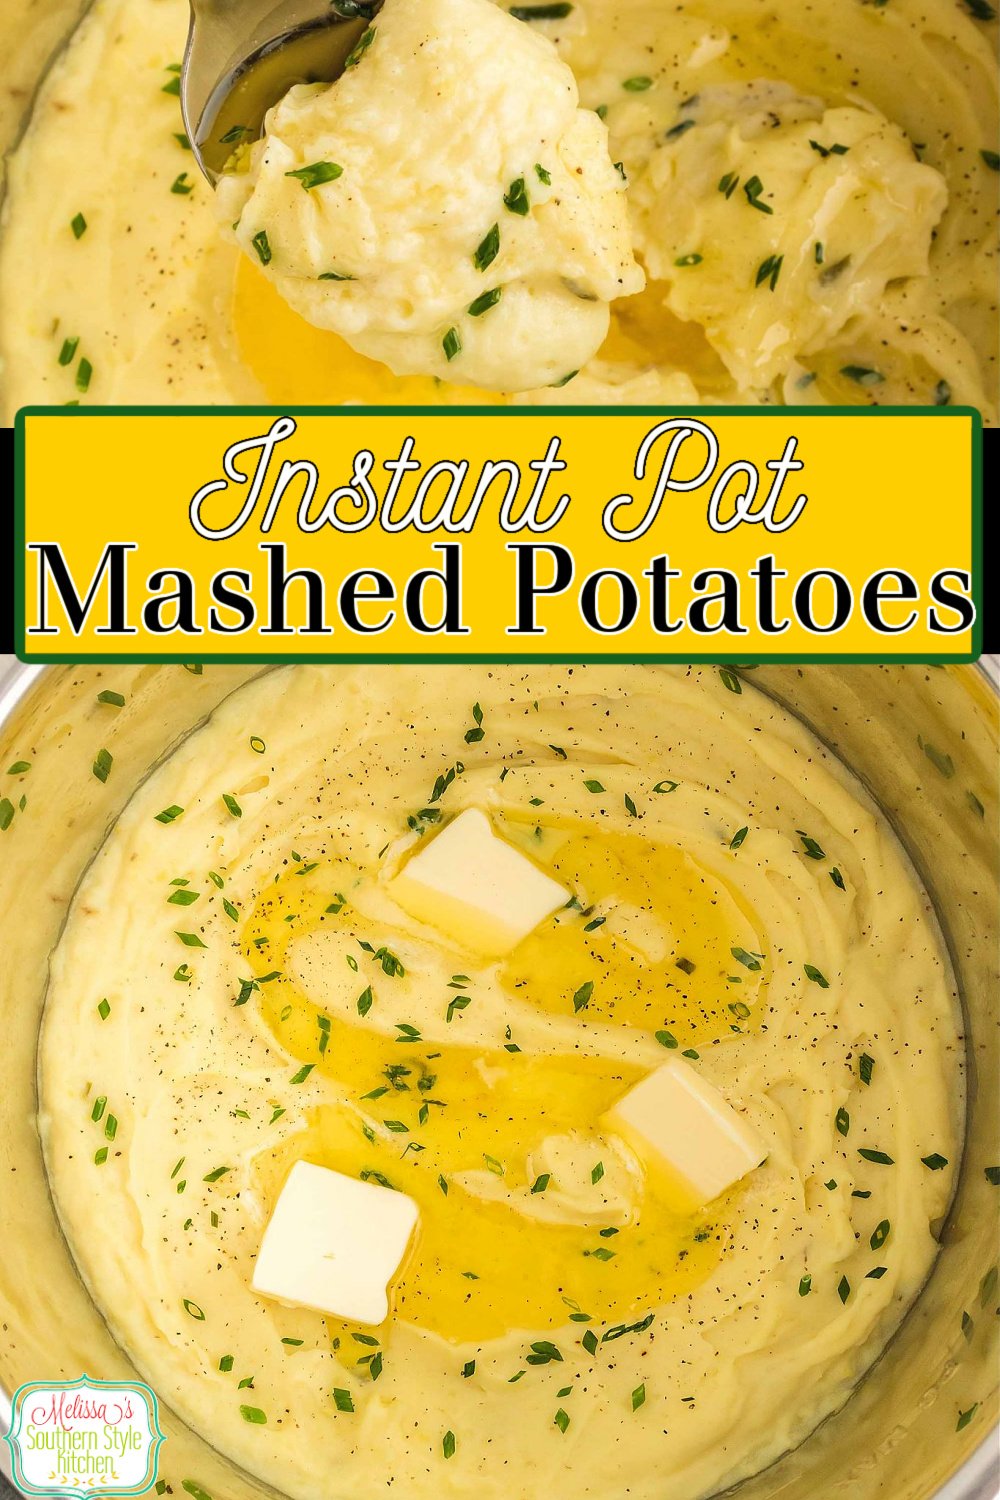 These creamy Instant Pot Mashed Potatoes are buttery and full flavored making them the perfect side dish option for any occasion #instantpotpotatoes #mashedpotatoes #potatorecipes #easymashedpotatoes #instantpotrecipes #thanksgivingrecipes #potatoes #bestmashedpotatorecipe via @melissasssk